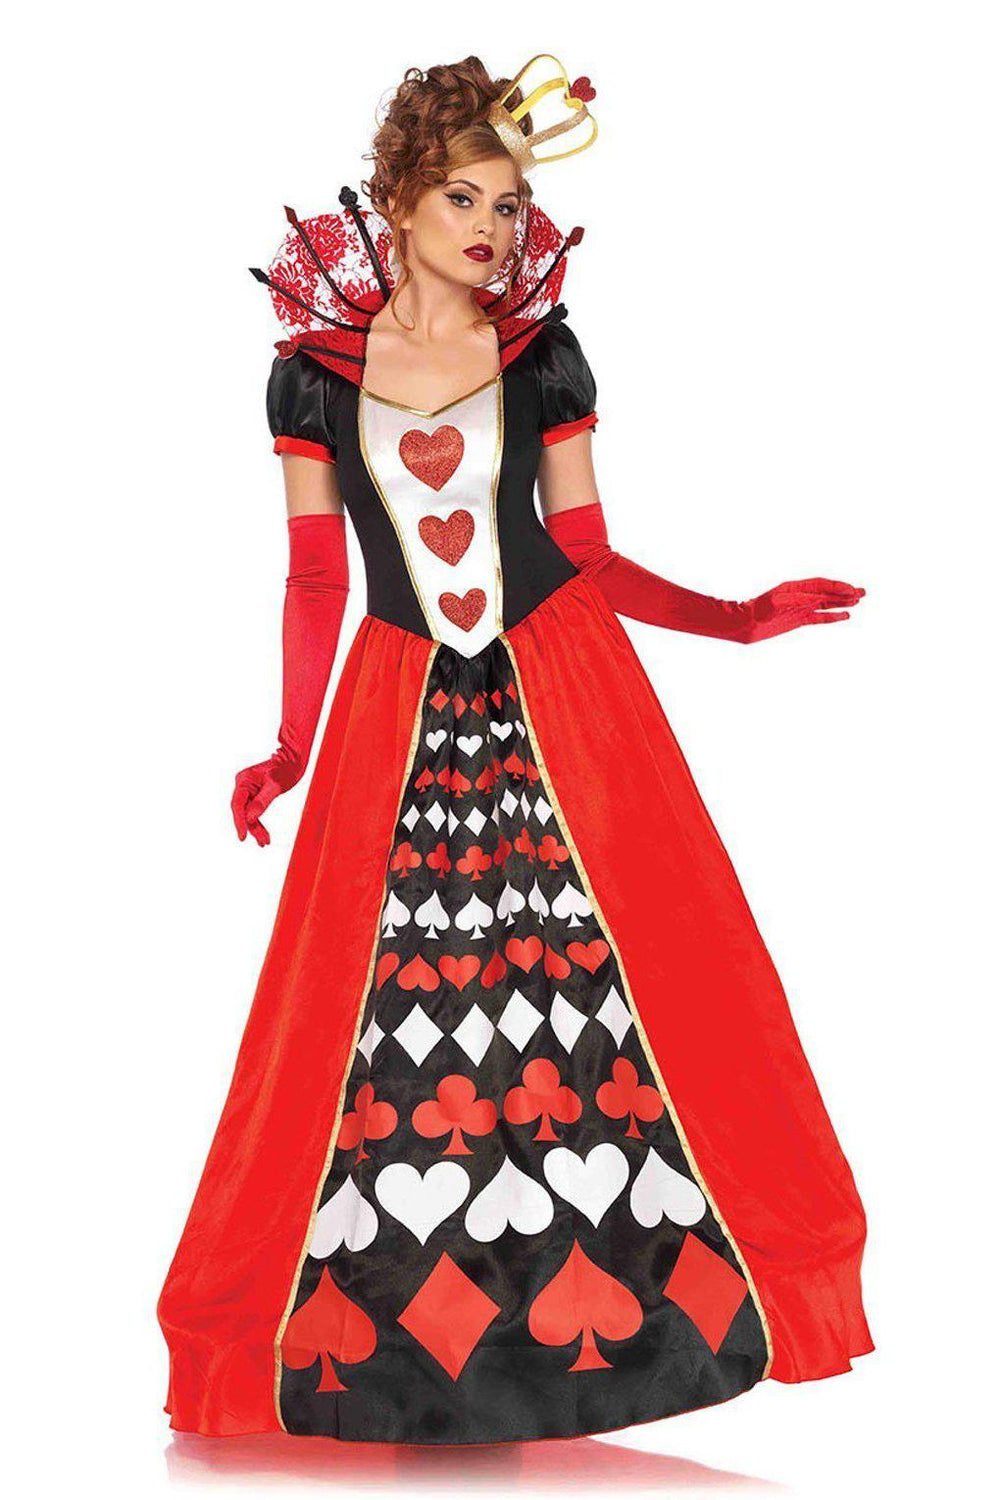 Deluxe Queen of Hearts Costume-Fairytale Costumes-Leg Avenue-SEXYSHOES.COM